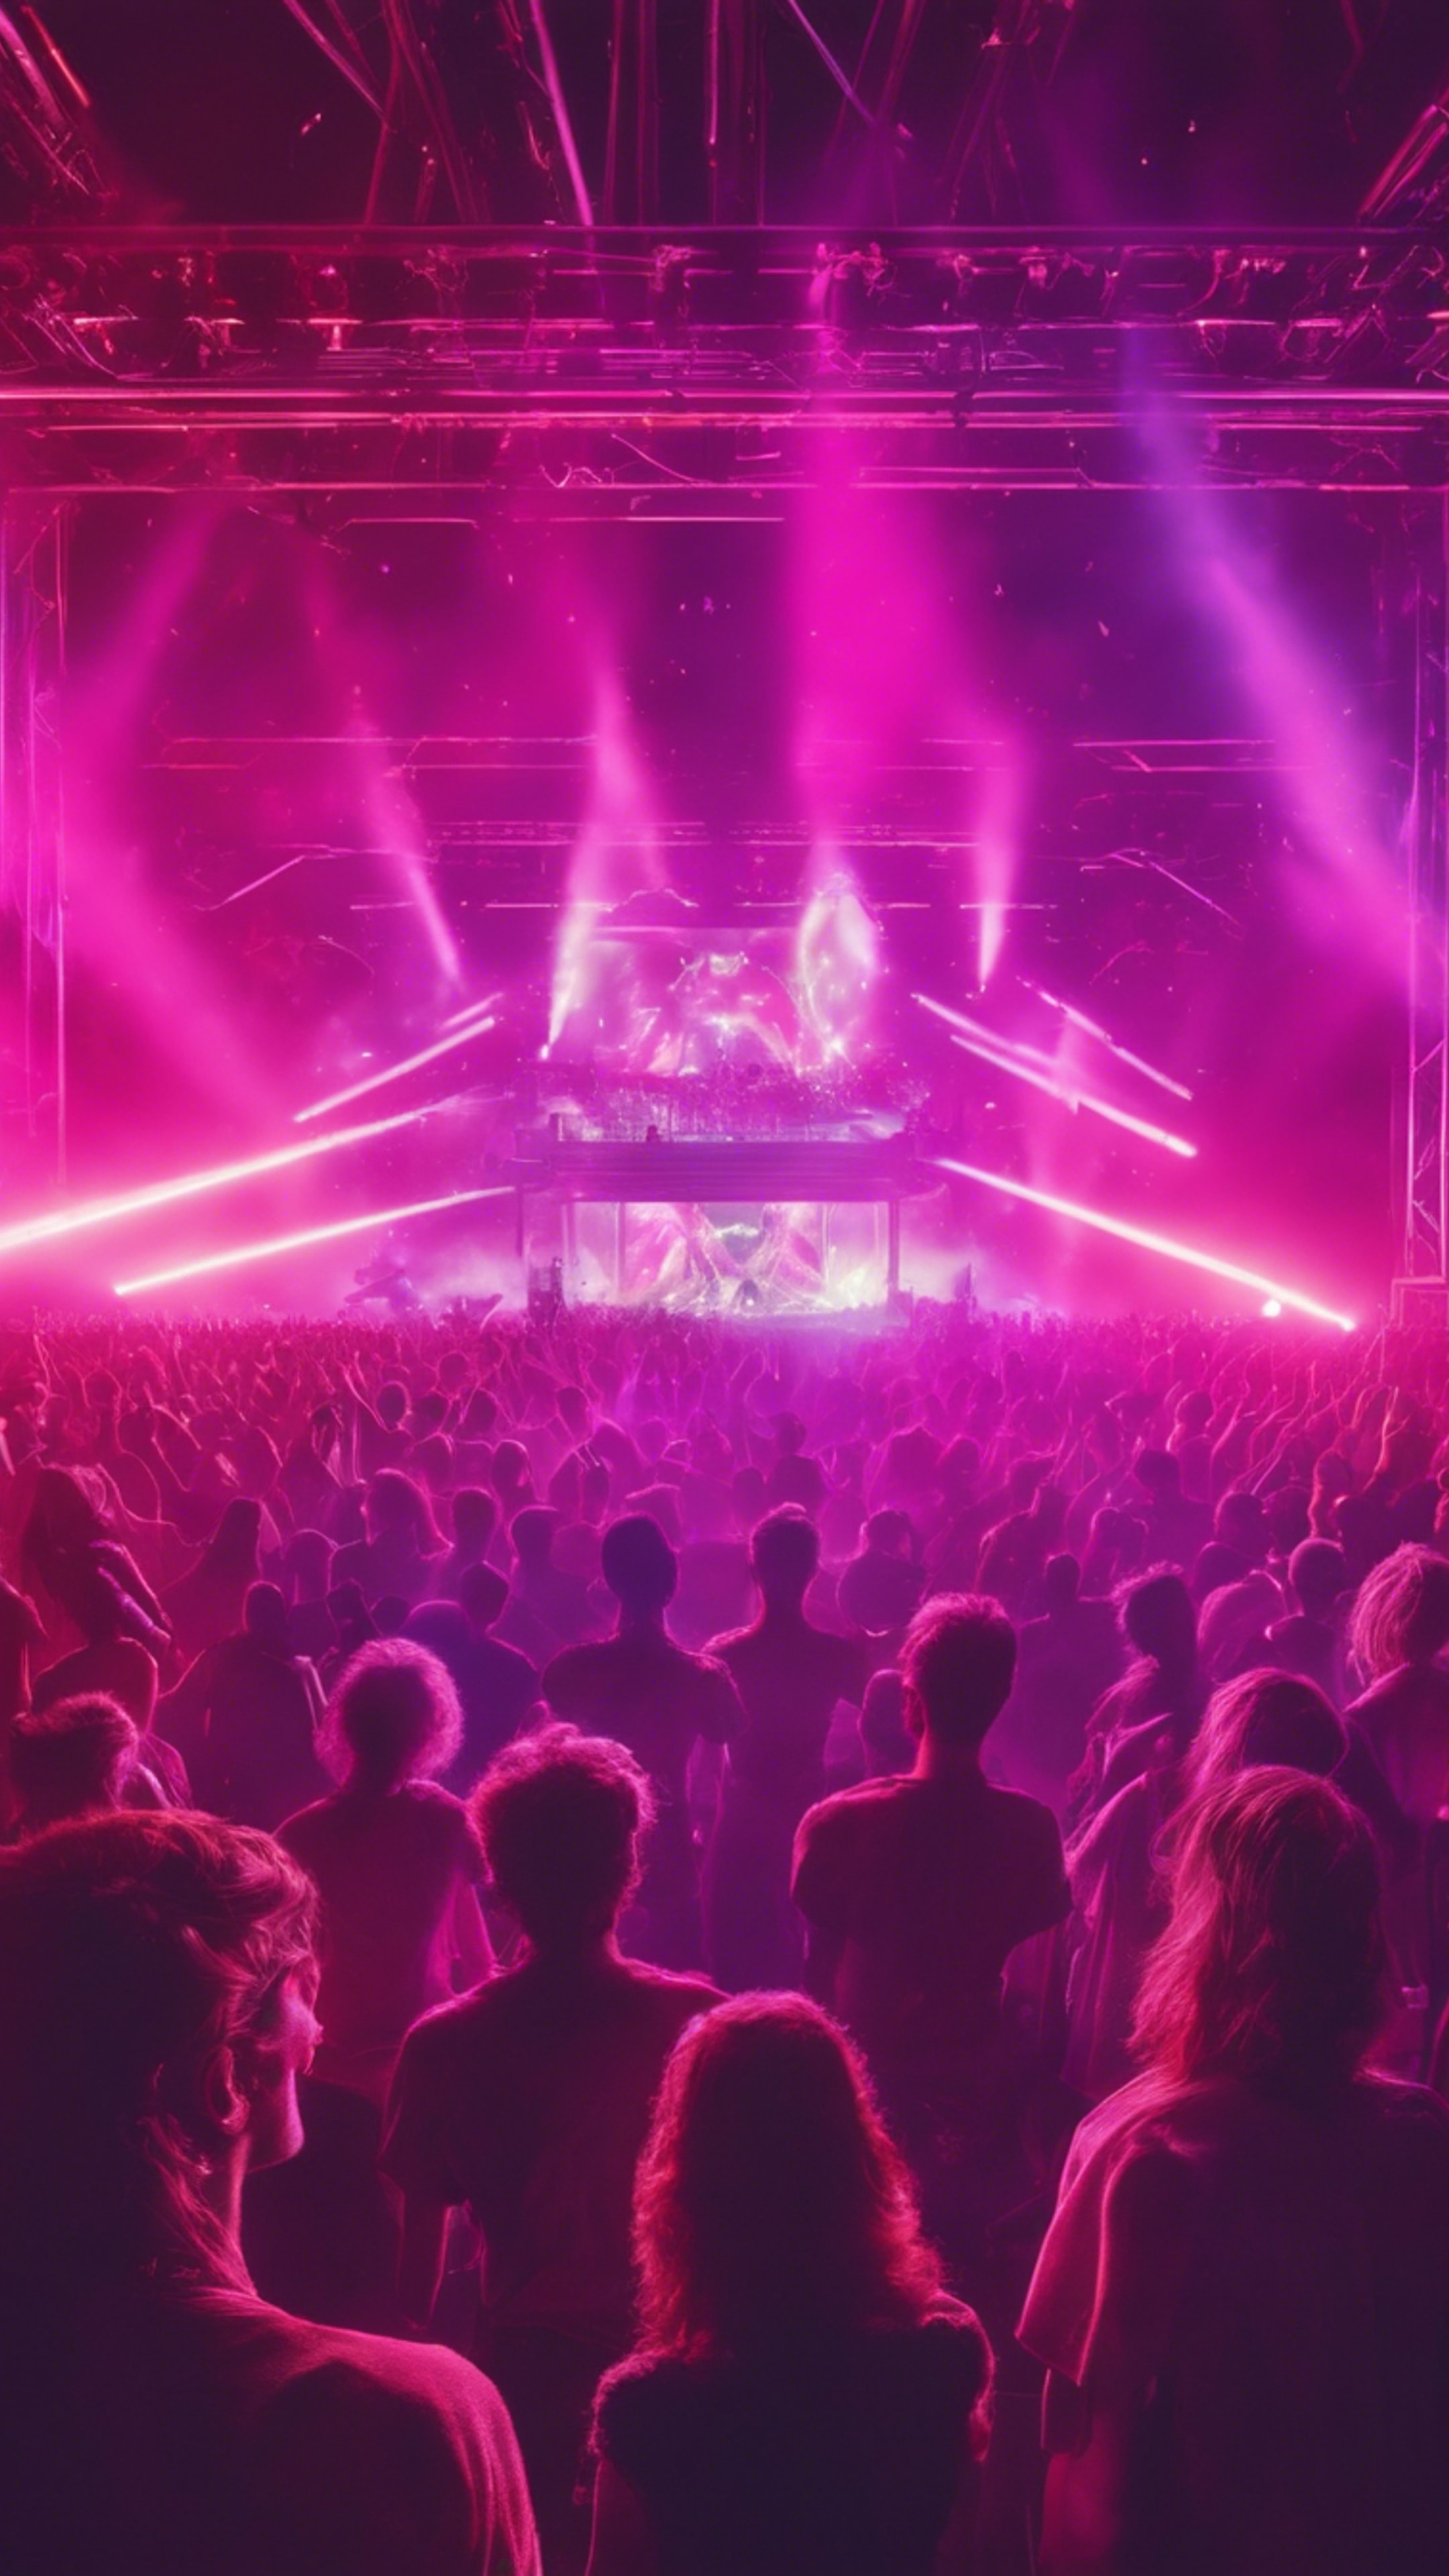 A 1980s inspired synthwave concert with lasers and a crowd of enthusiasts. Wallpaper[953a348f926747e38809]